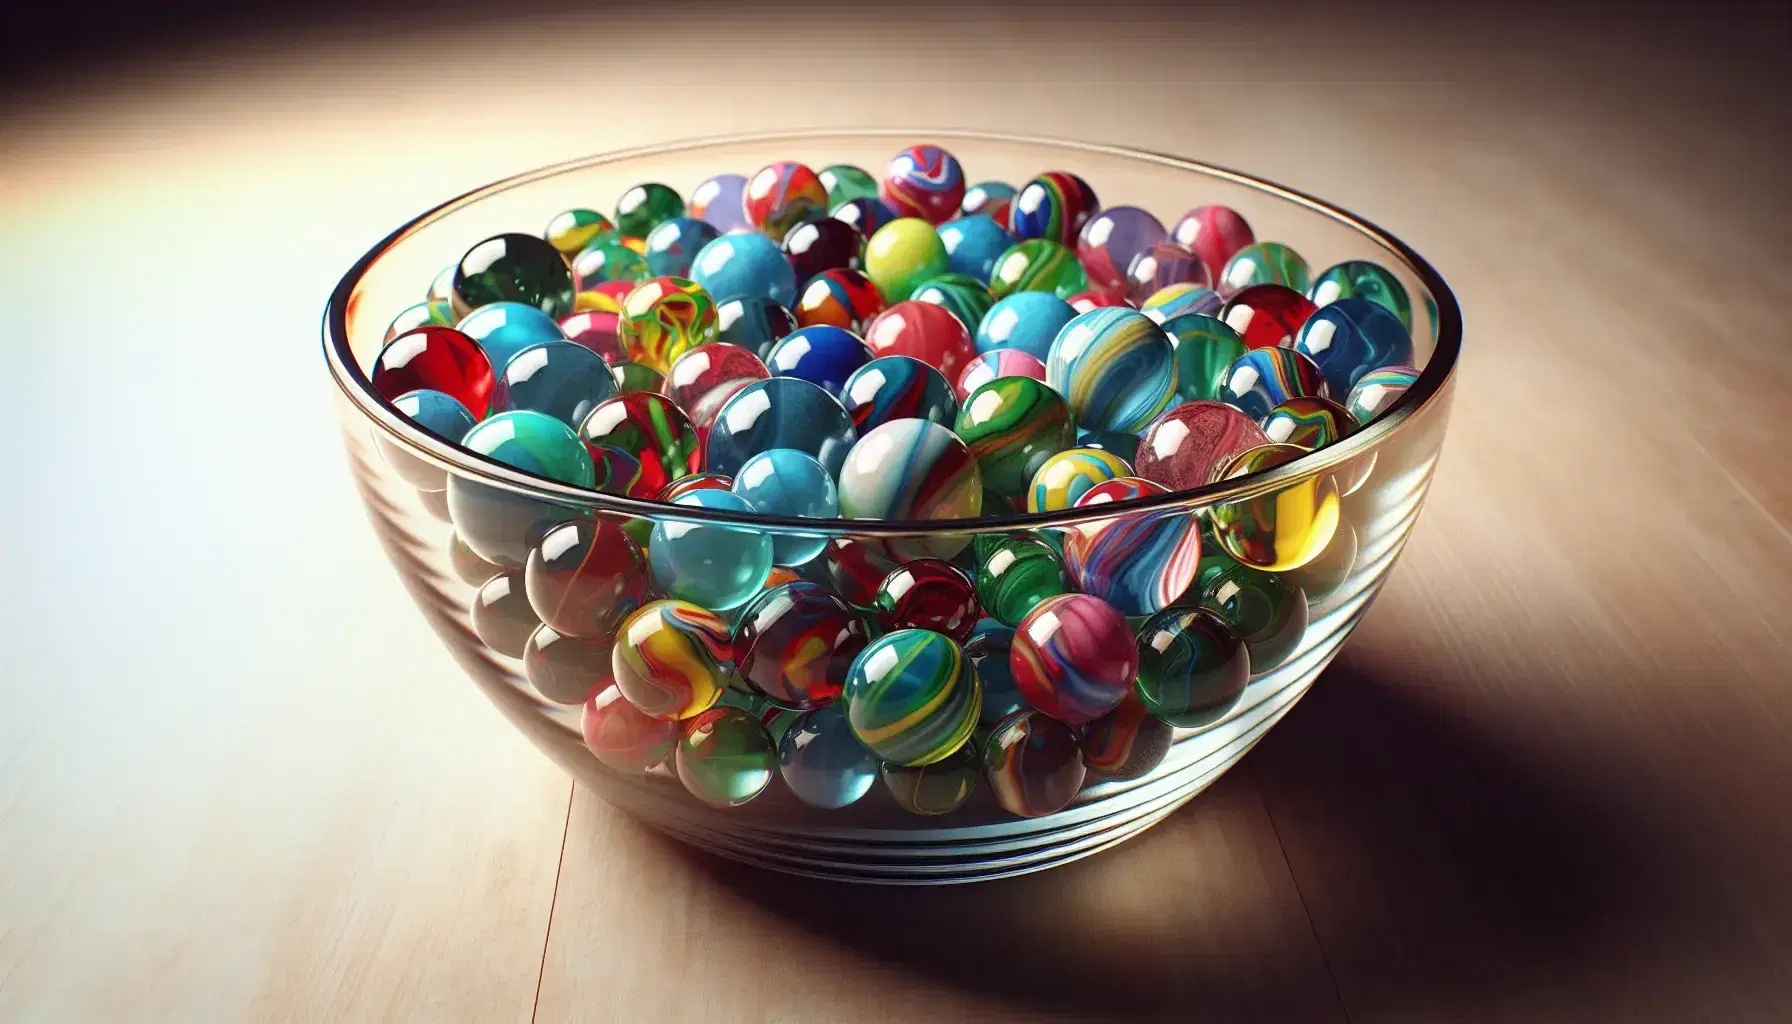 Clear glass bowl on light wooden table full of colorful marbles in red, blue, green, yellow and purple with shiny highlights.